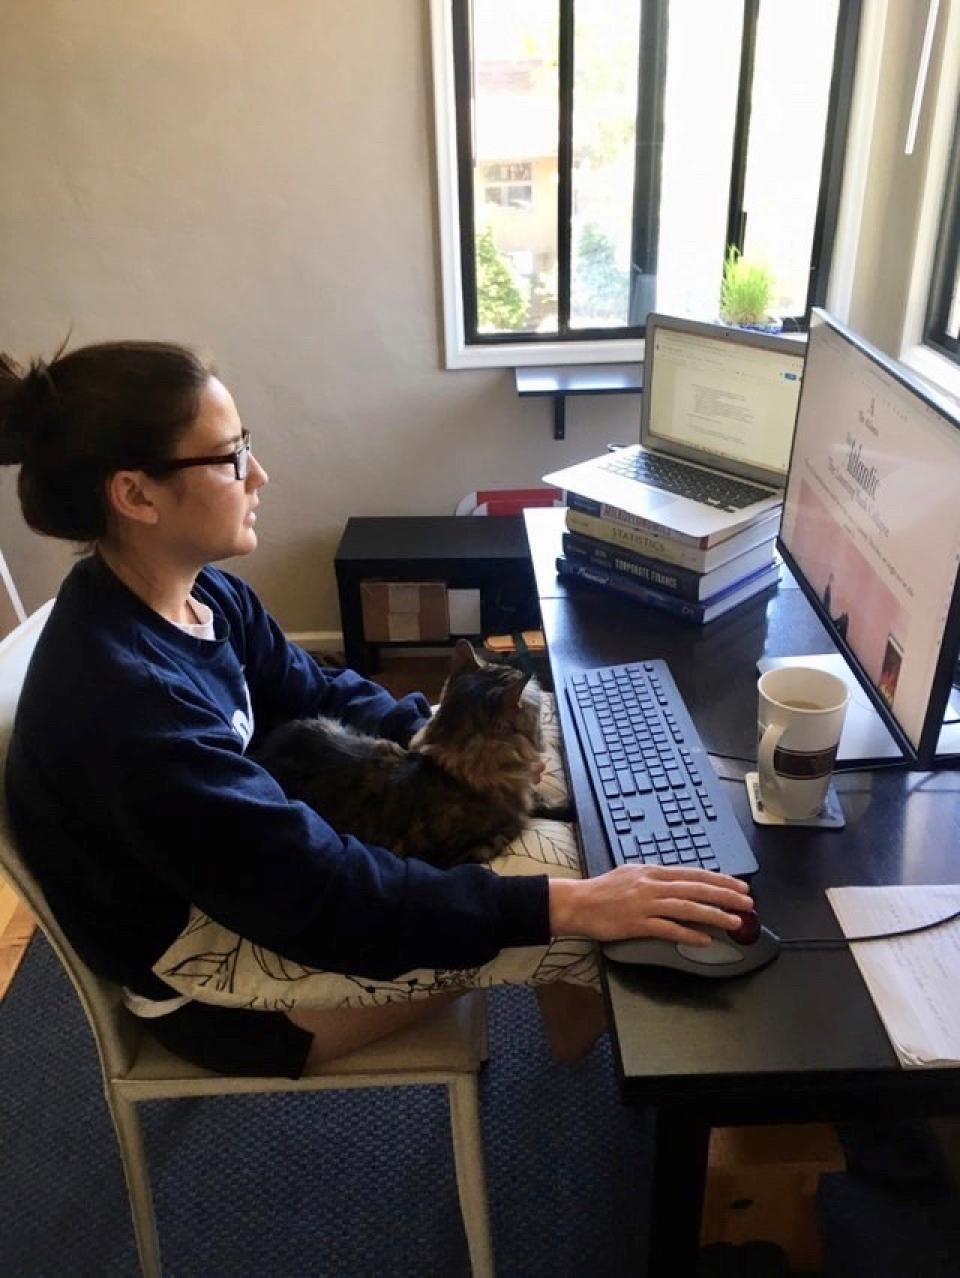 Adjusting to shelter-in-place orders, Howard has been working and taking classes online at home.